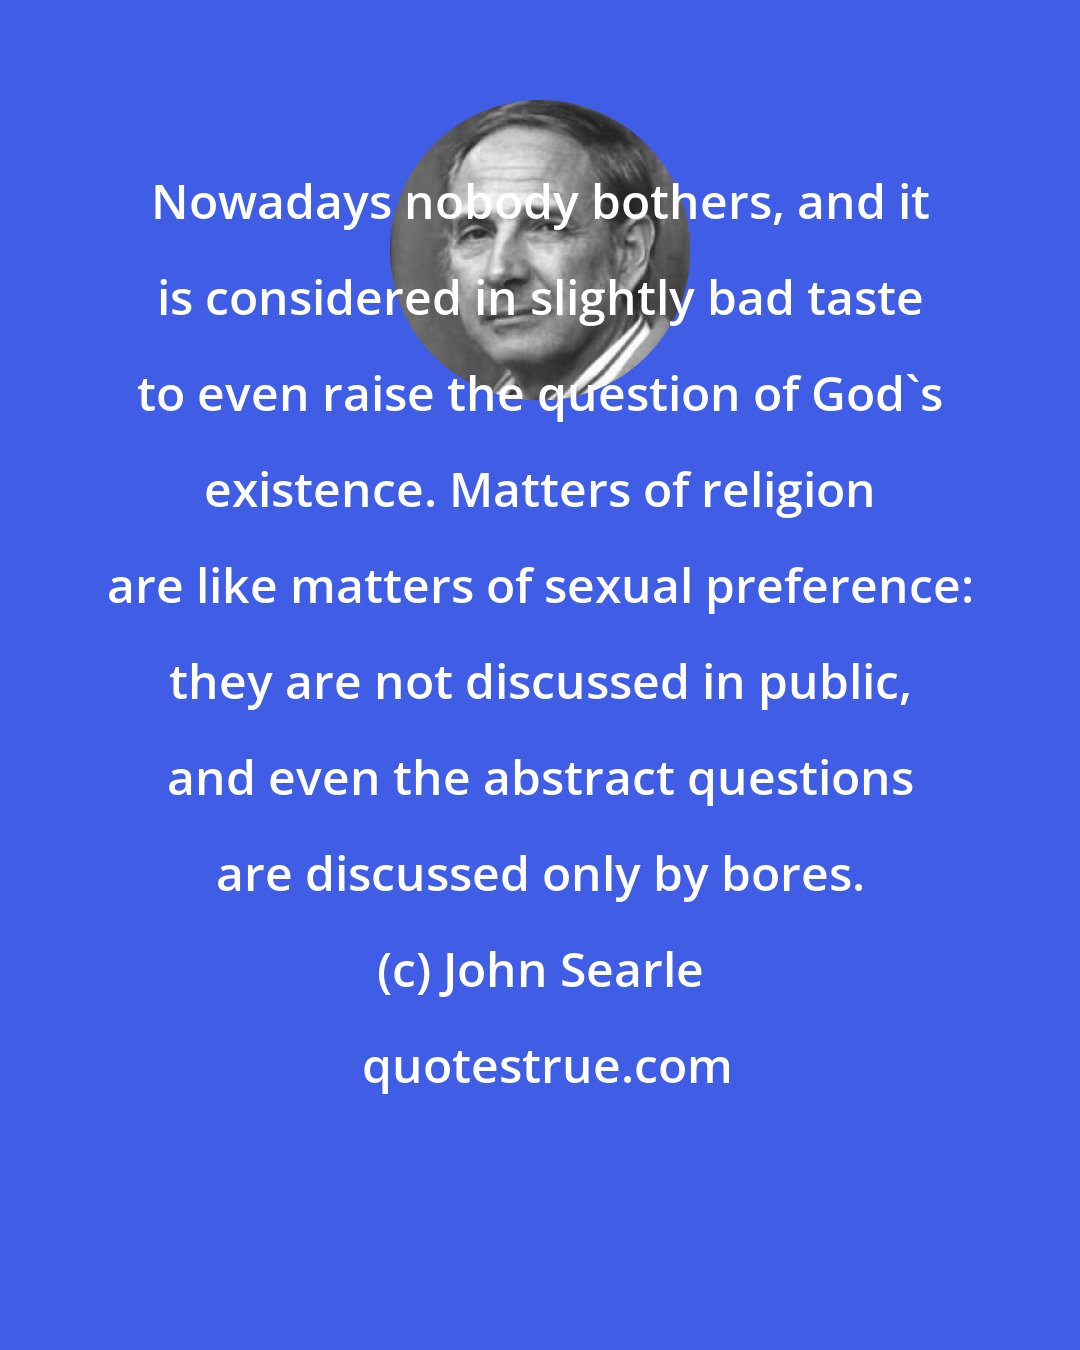 John Searle: Nowadays nobody bothers, and it is considered in slightly bad taste to even raise the question of God's existence. Matters of religion are like matters of sexual preference: they are not discussed in public, and even the abstract questions are discussed only by bores.